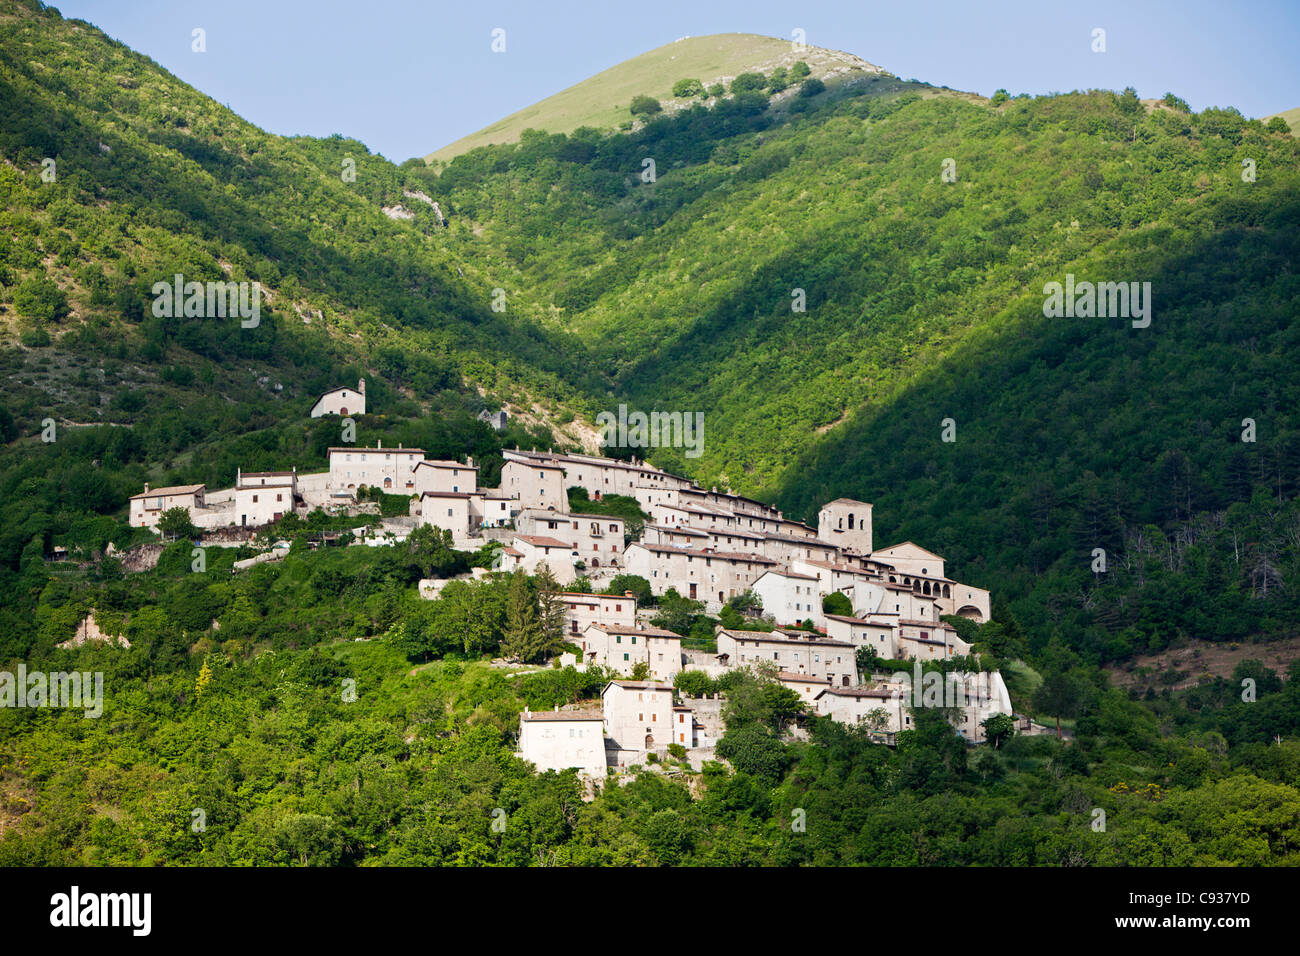 Italy, Umbria, Campi. The small and ancient village of Campi, near Norcia, perched on a hillside. Stock Photo